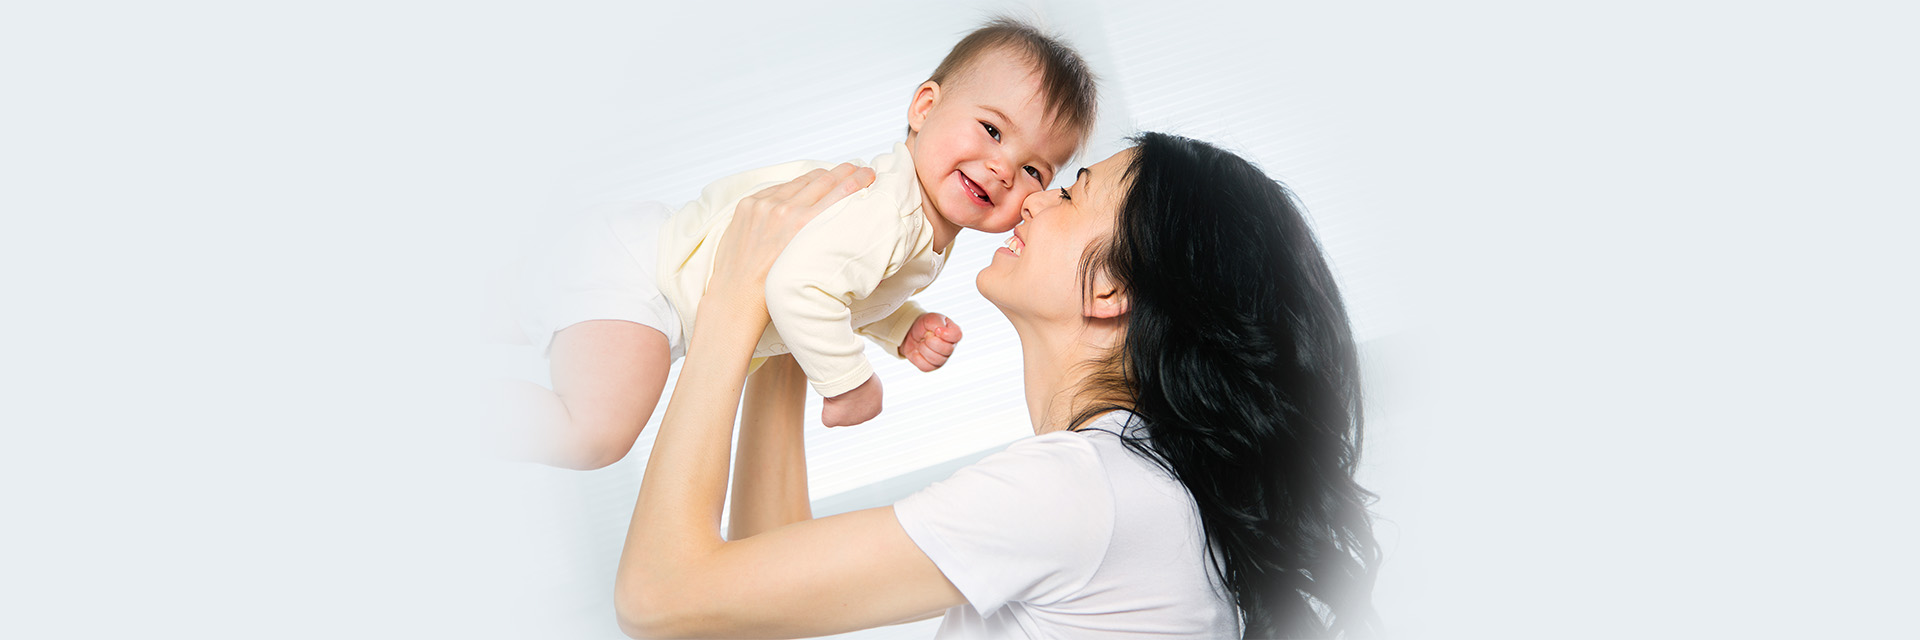 https://www.texashealth.org/baby-care/-/media/Project/THR/Sub-Sites/THR-Baby-Care/Header-Images/Header-mom-holding-smiling-baby-air.jpg?h=640&iar=0&w=1920&hash=62BB5223C46D6545F55EF16F8E986BF6